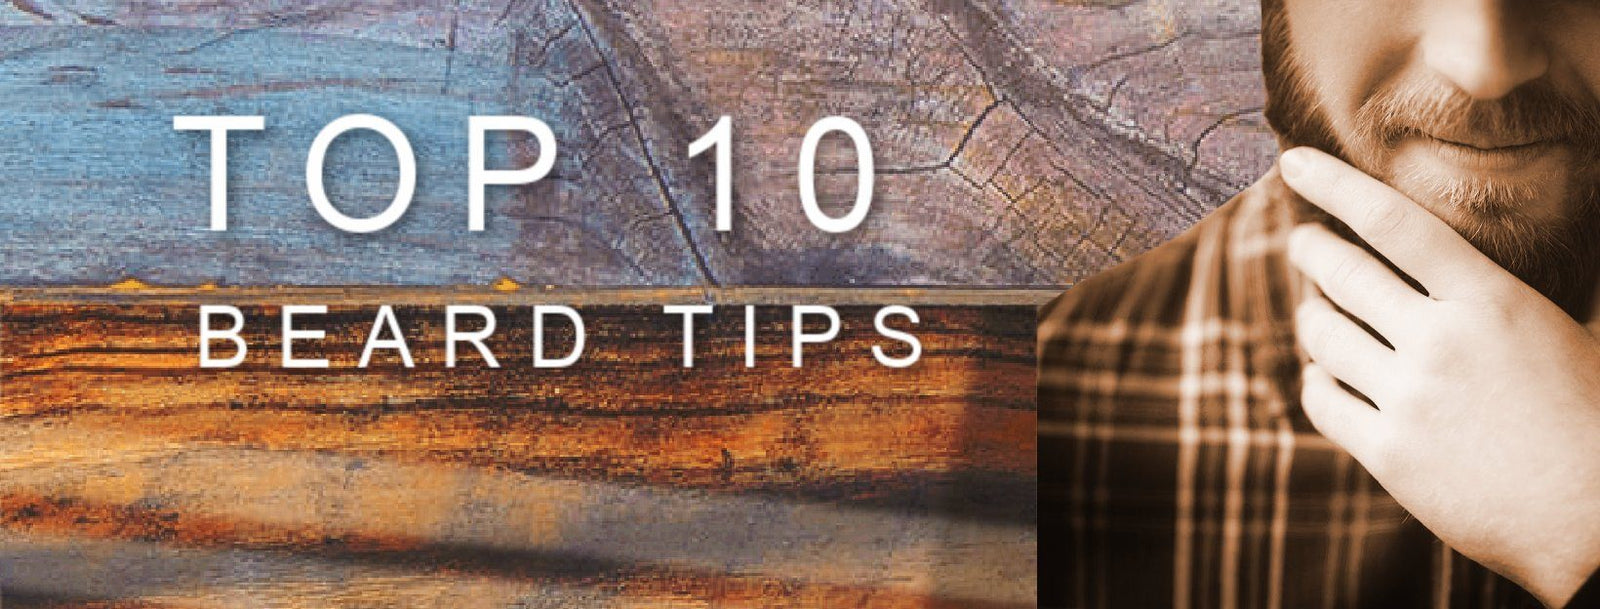 Top 10 Best Tips for Beard Care